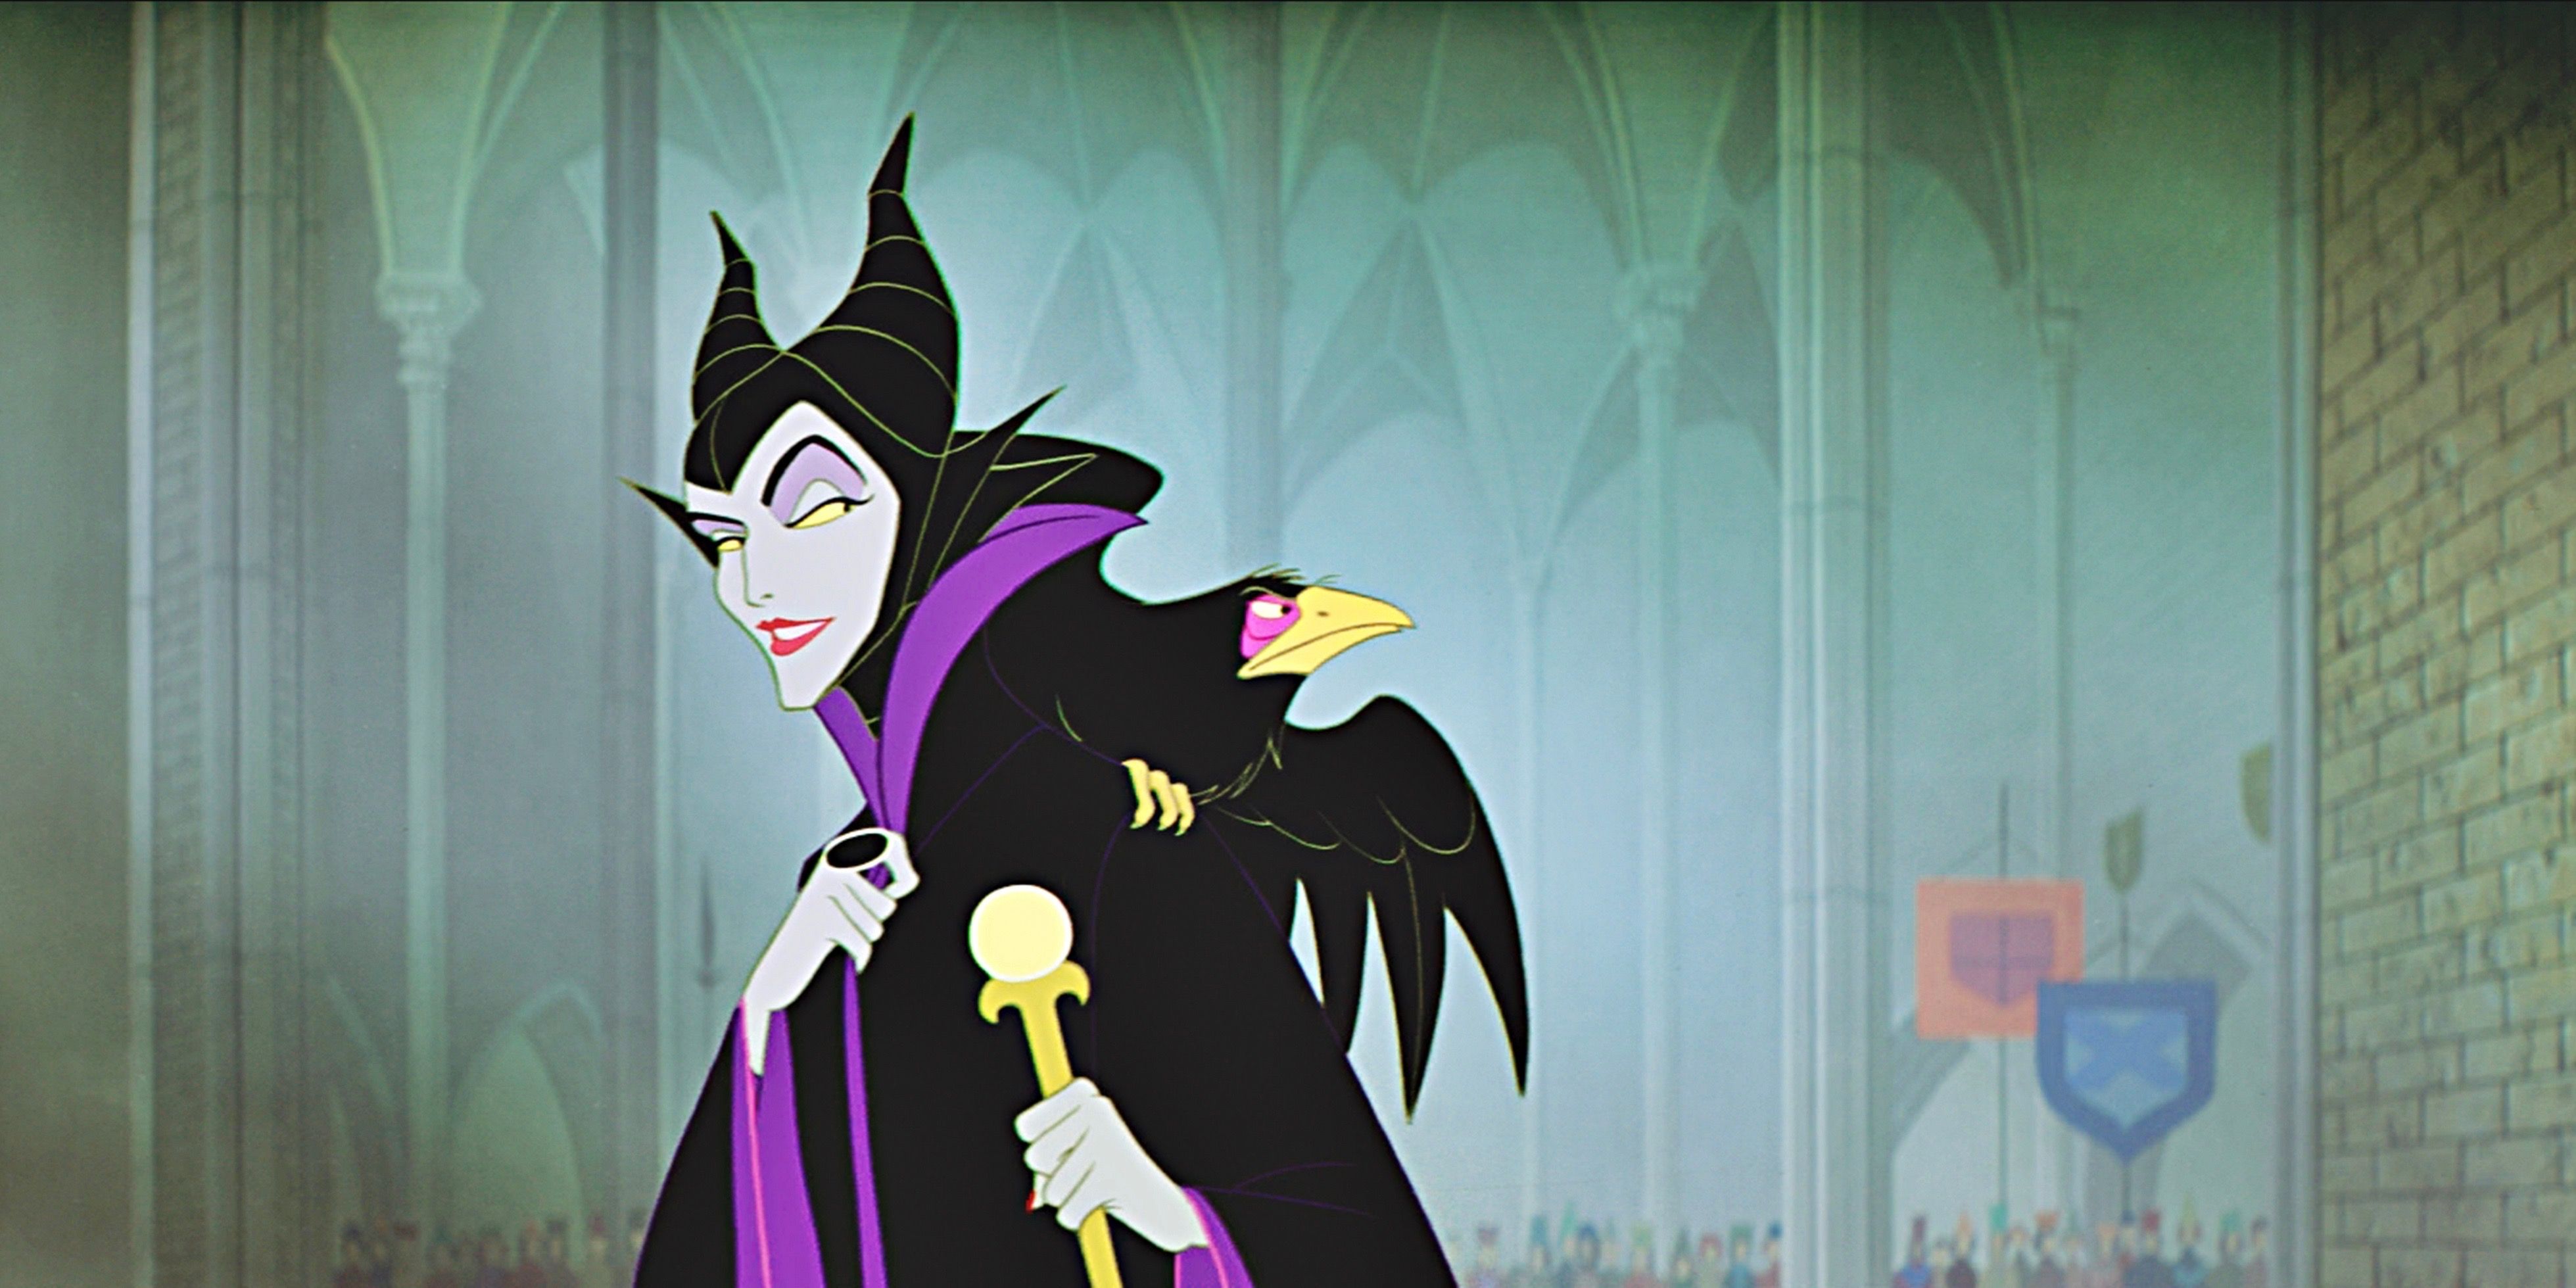 5 Reasons The Live Action Maleficent Is Best (& 5 Why The Animated One Is Better)